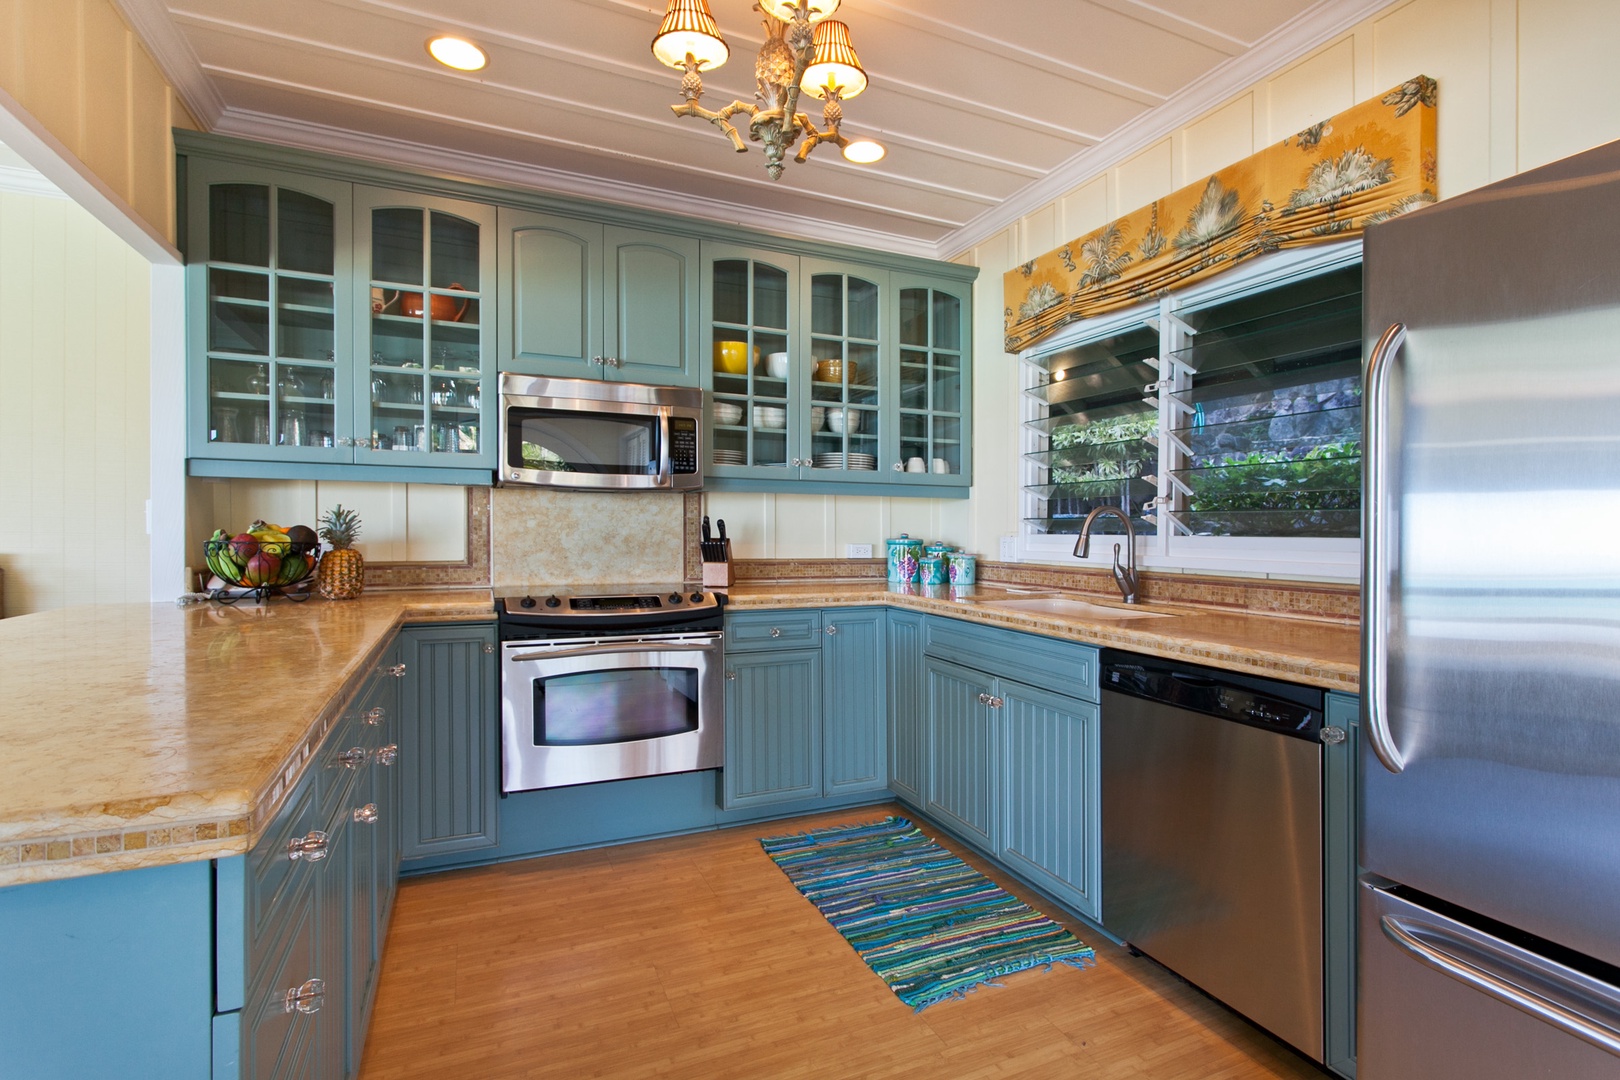 Kailua Vacation Rentals, Lanikai Village* - Hale Kainalu: The well-appointed kitchen makes for an enjoyable space to prepare a meal.